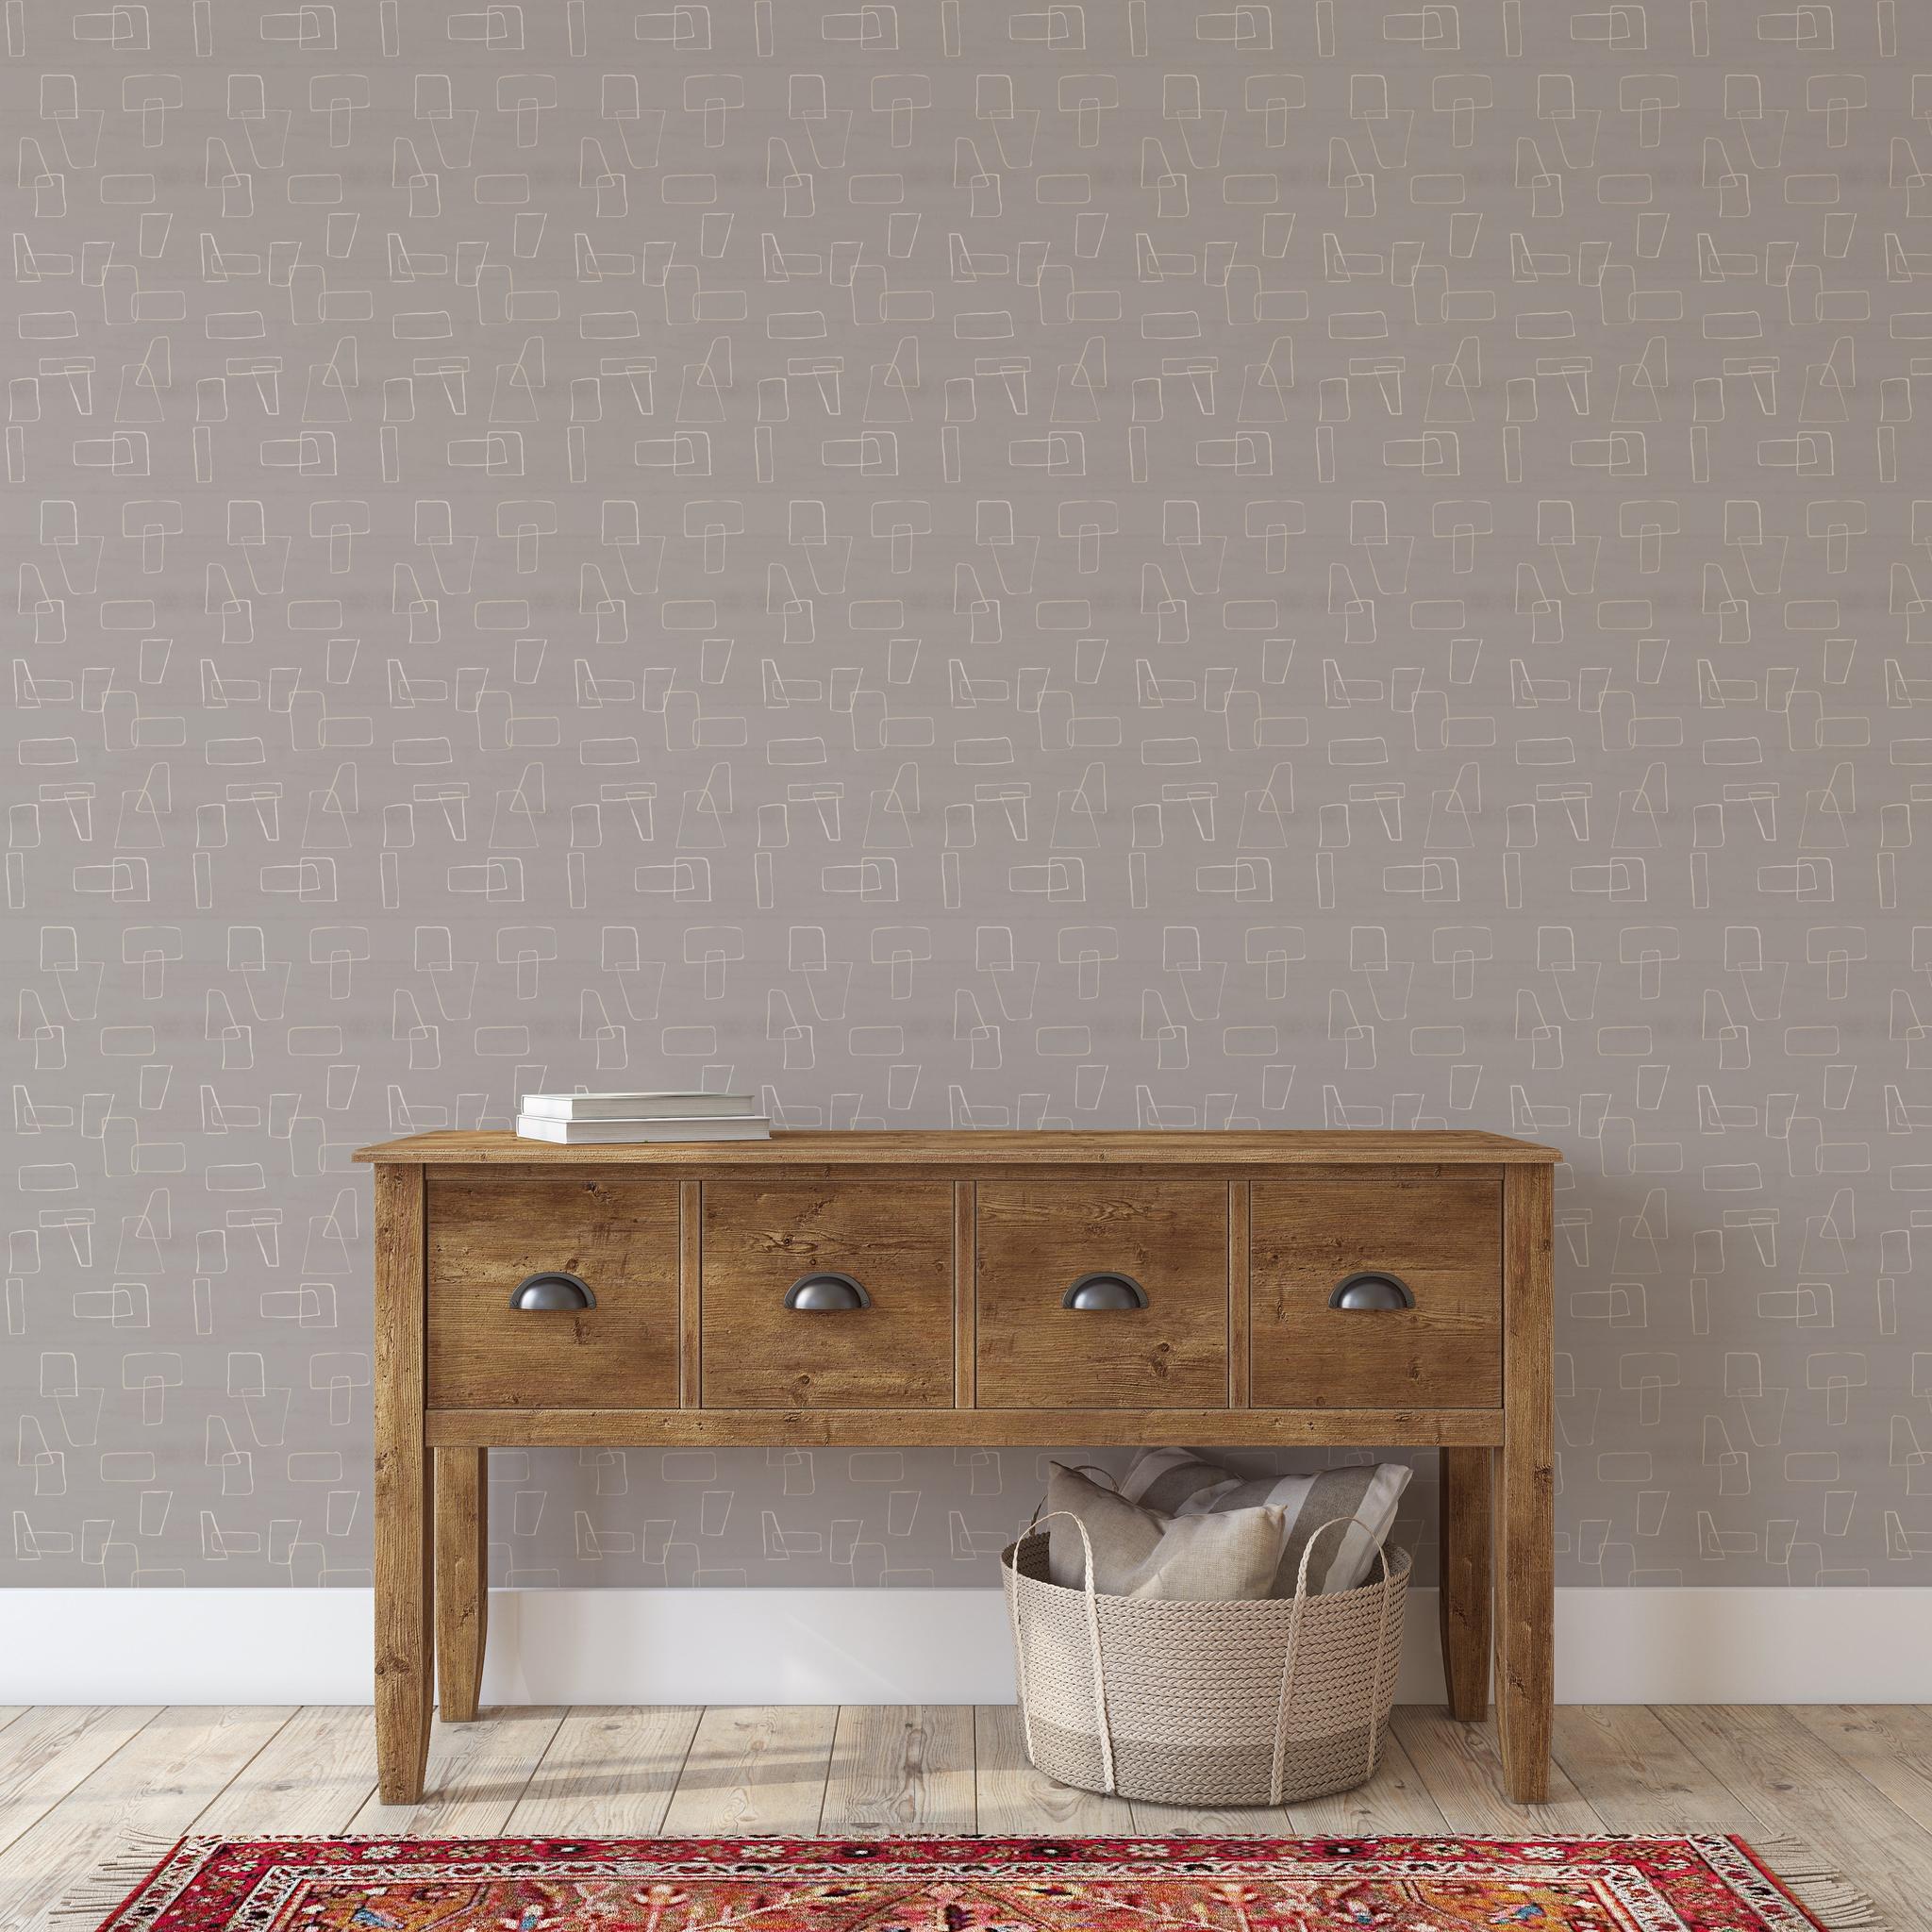 "Wall Blush's Greyson Wallpaper featured in a stylish living room setting, with a focus on the elegant wall design."